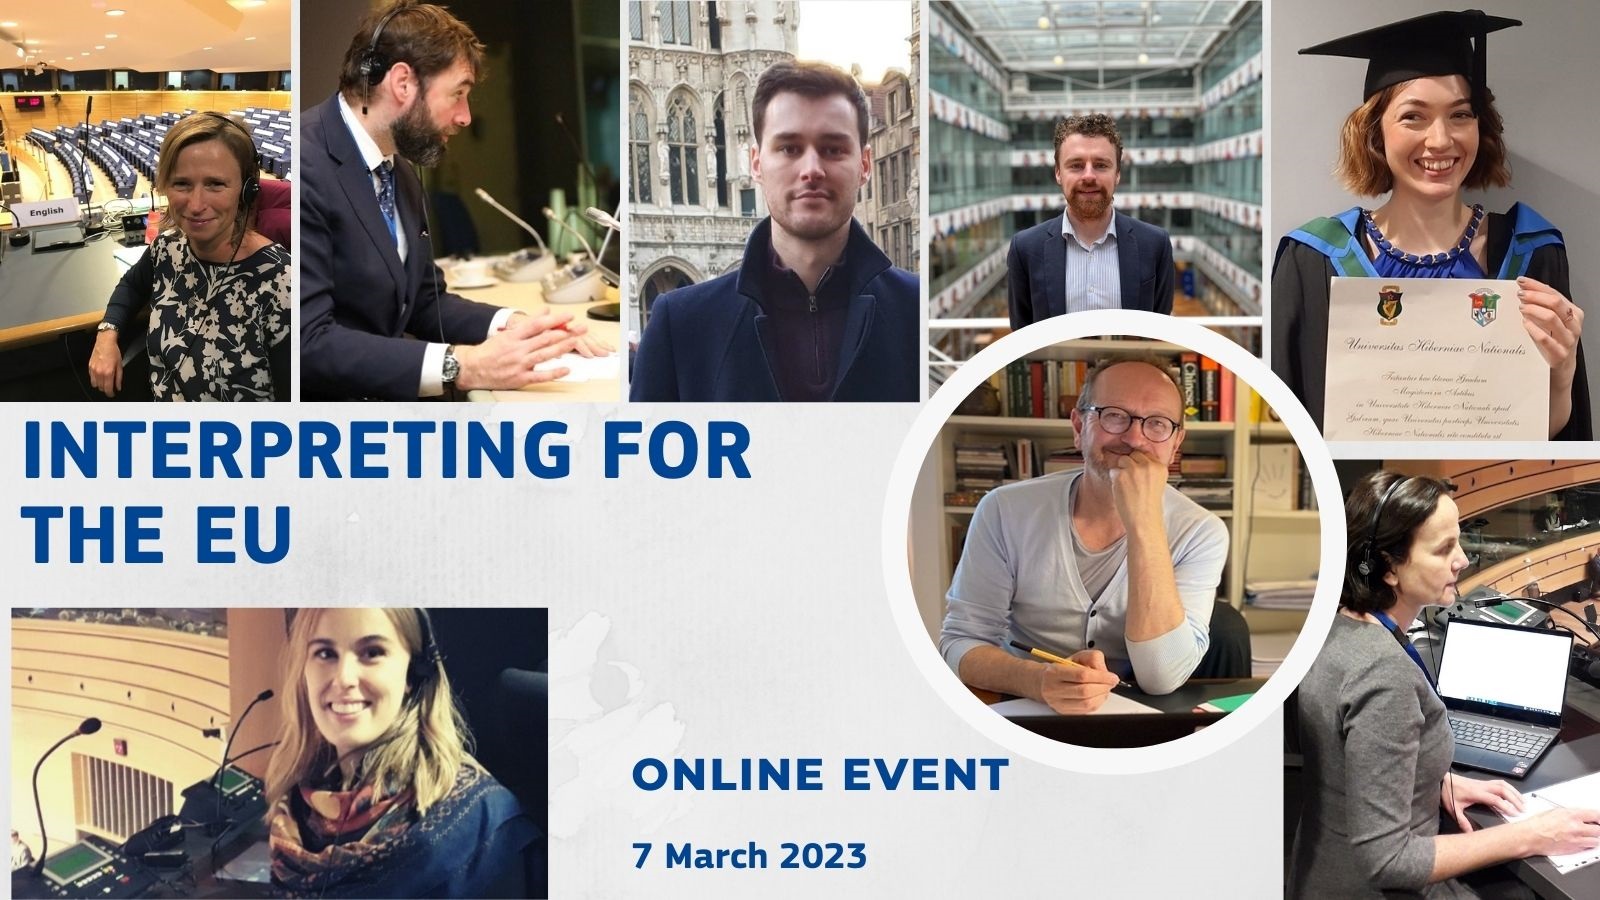 Image promoting the event on interpretation in the EU institutions of 7 March 2023 with photos of different Irish interpreters working in the EU institutions